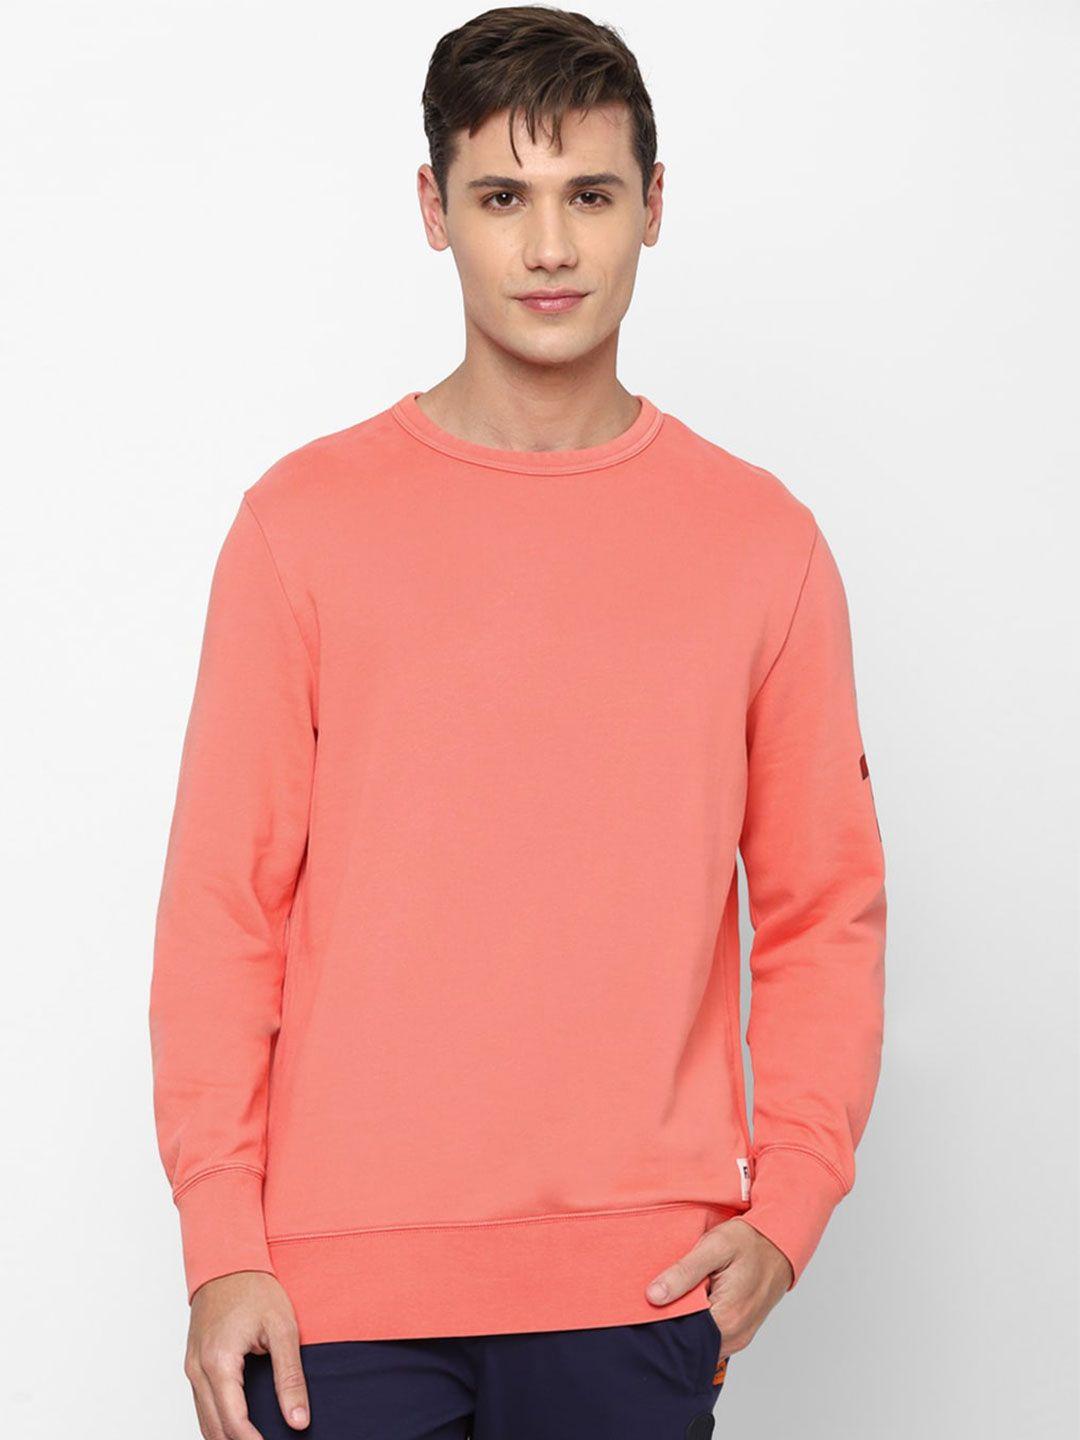 american eagle outfitters men pink solid sweatshirt